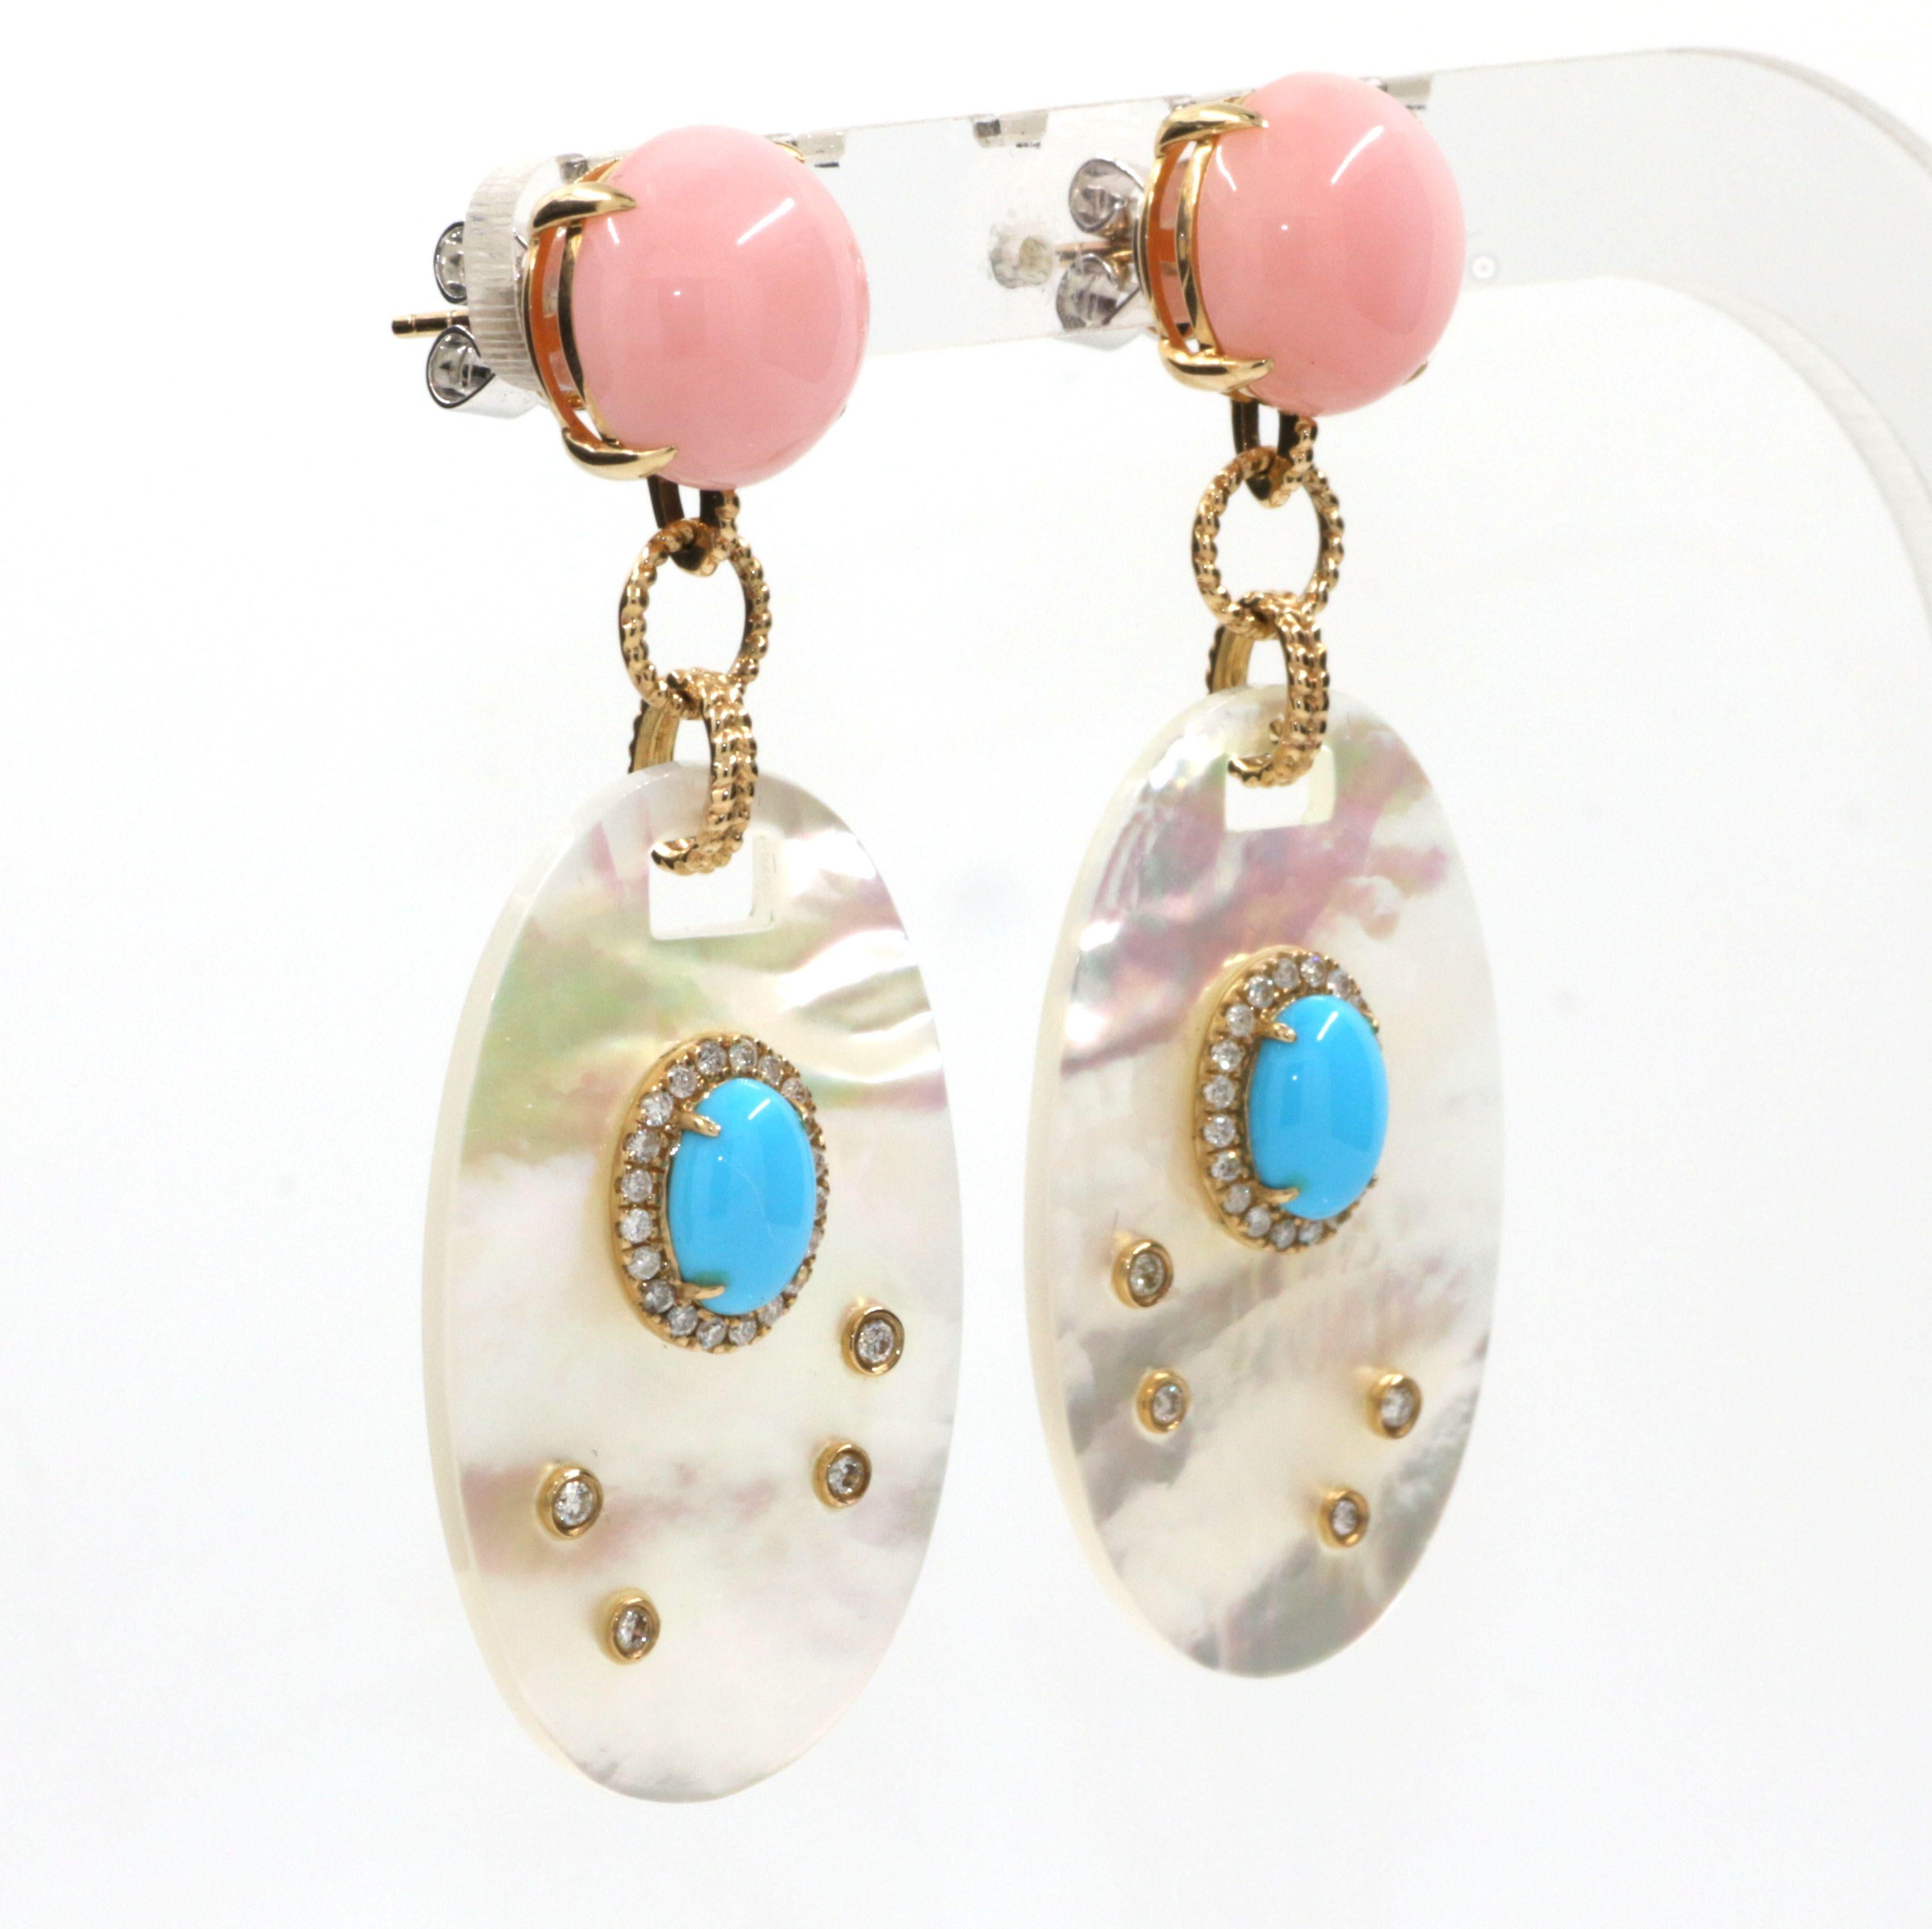 This earring features 2 mother of pearl weight 22.20 carat, turquoise slices are topped weight 1.67 carat and 0.37 carat diamonds.  The mother of pearl is handcrafted and set with 2 pink opal.
The length of earrings is 55mm.

Mother of  Pearl 22.20